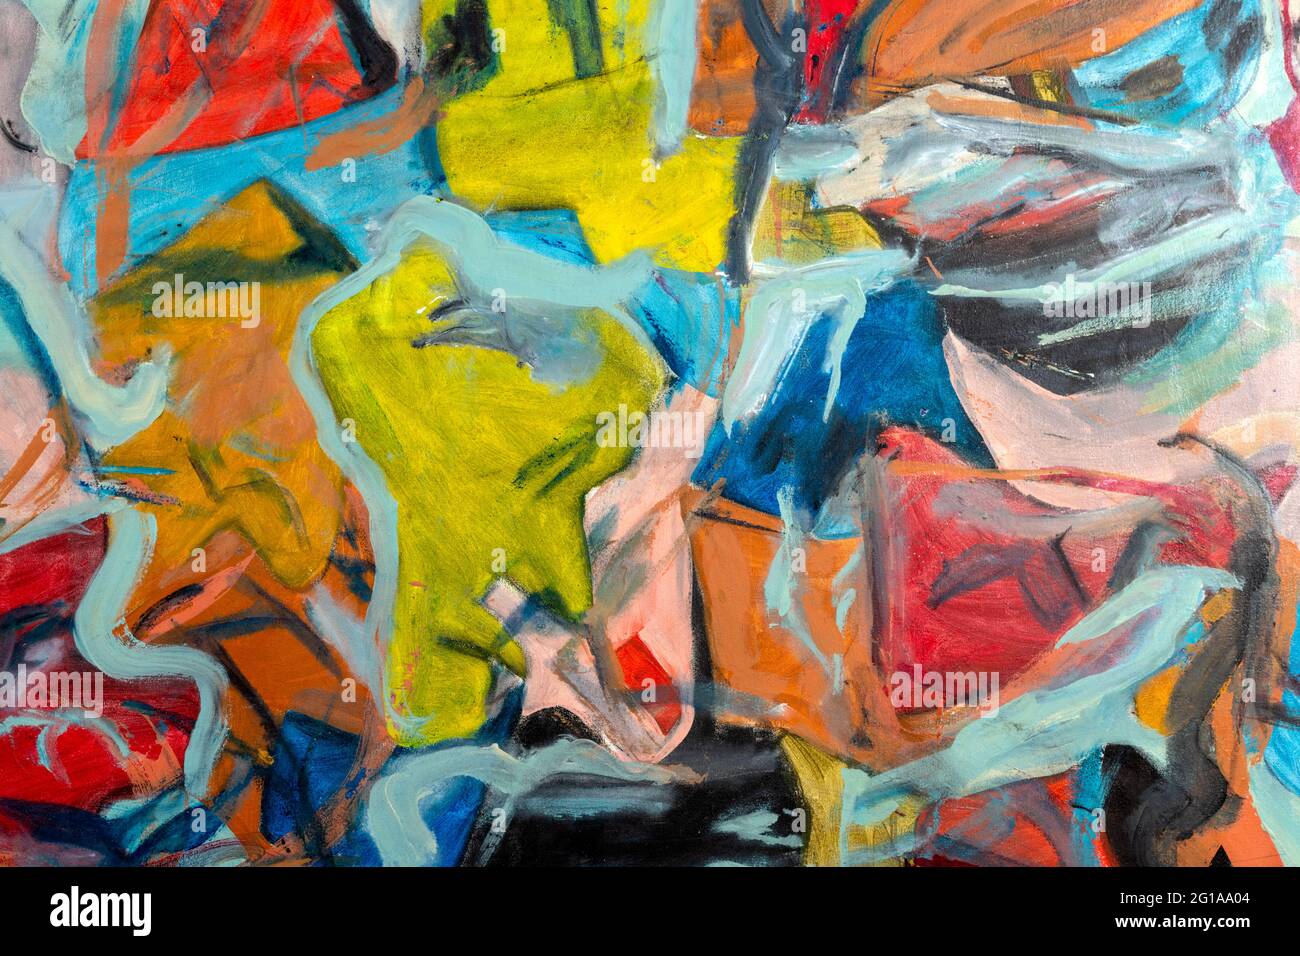 Abstract painting fragment with vibrant colors, strong shapes and brushstrokes textures. Artistic unique painting. Stock Photo